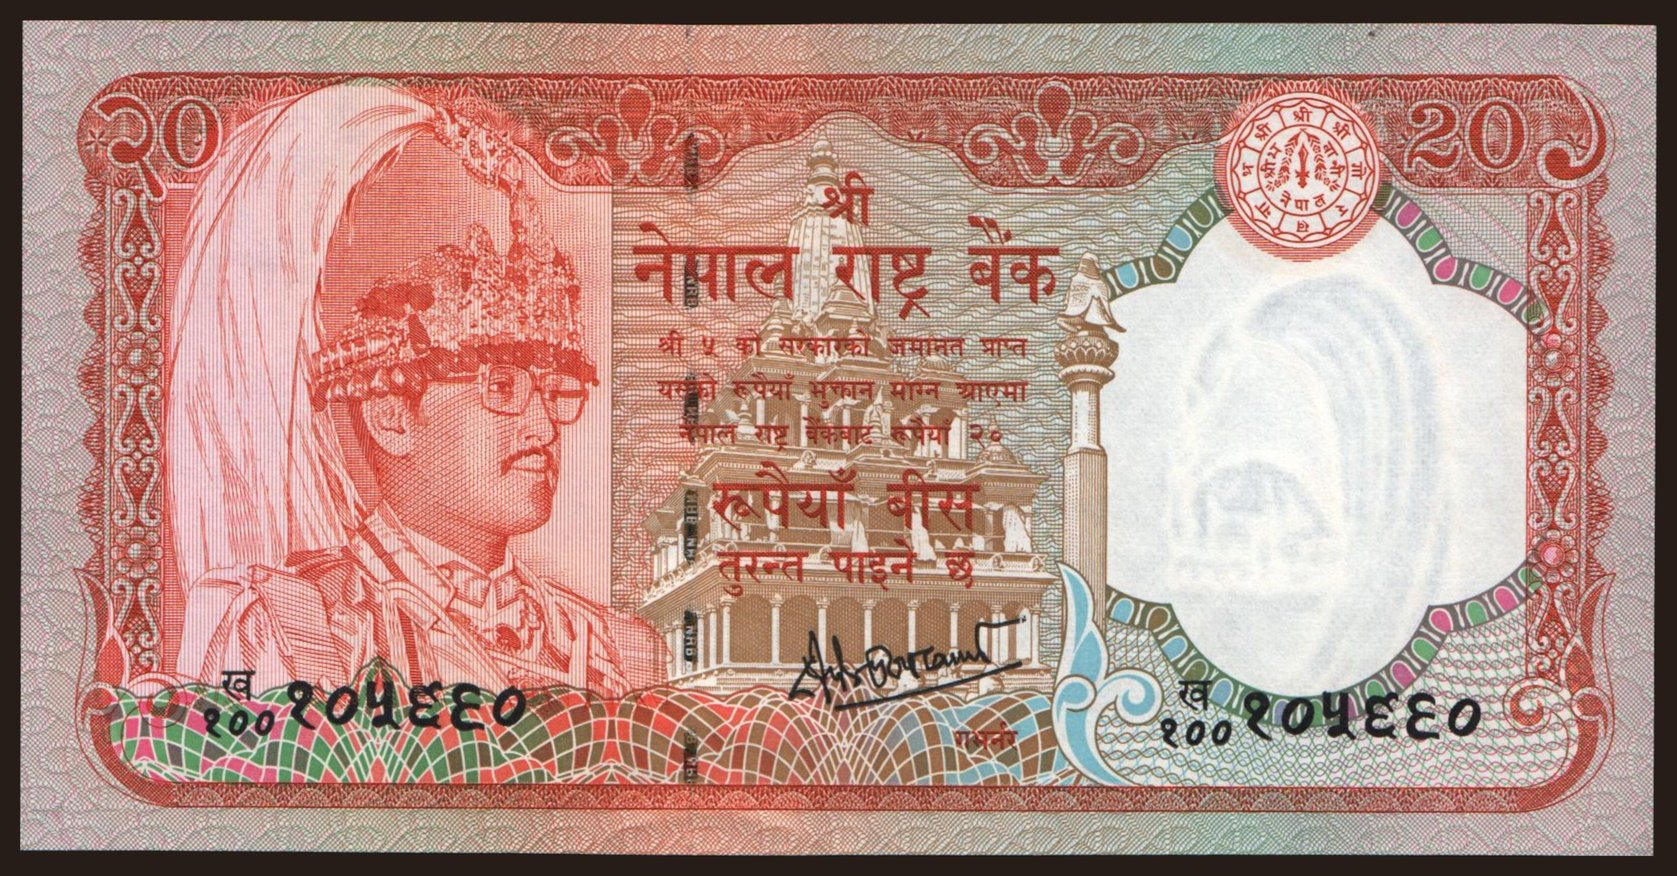 20 rupees, 1988